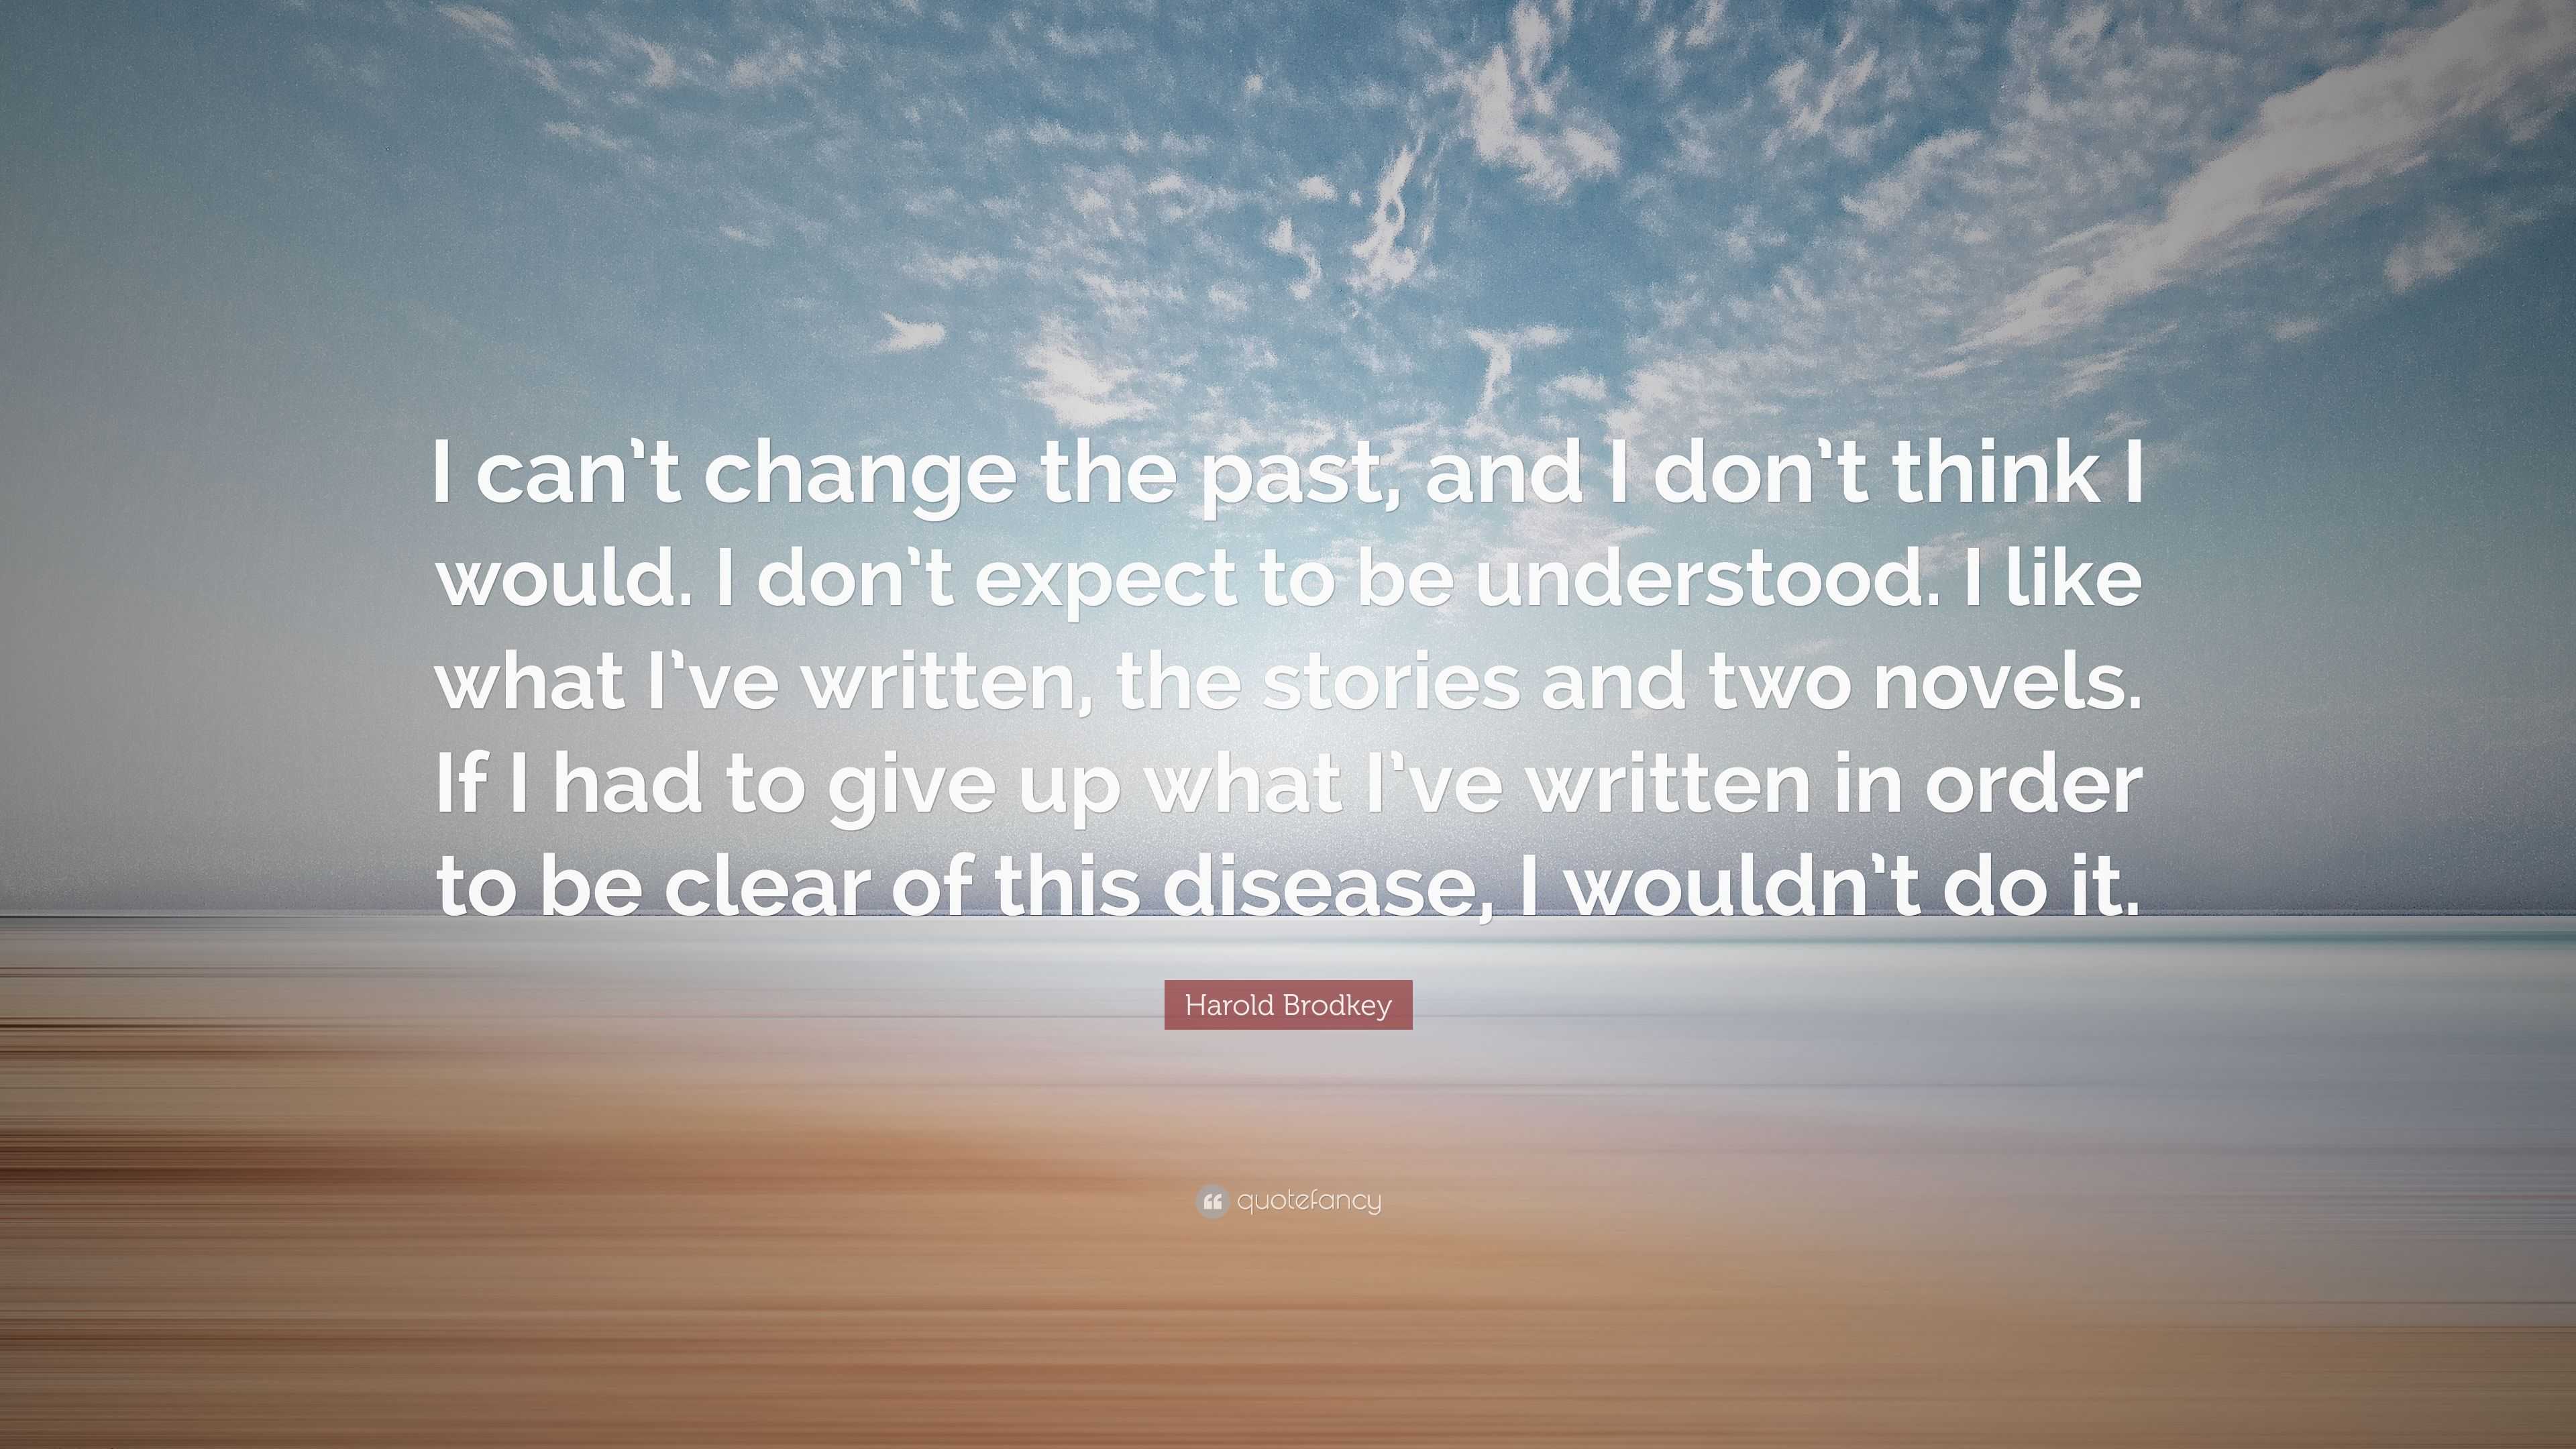 Harold Brodkey Quote: “I can’t change the past, and I don’t think I ...